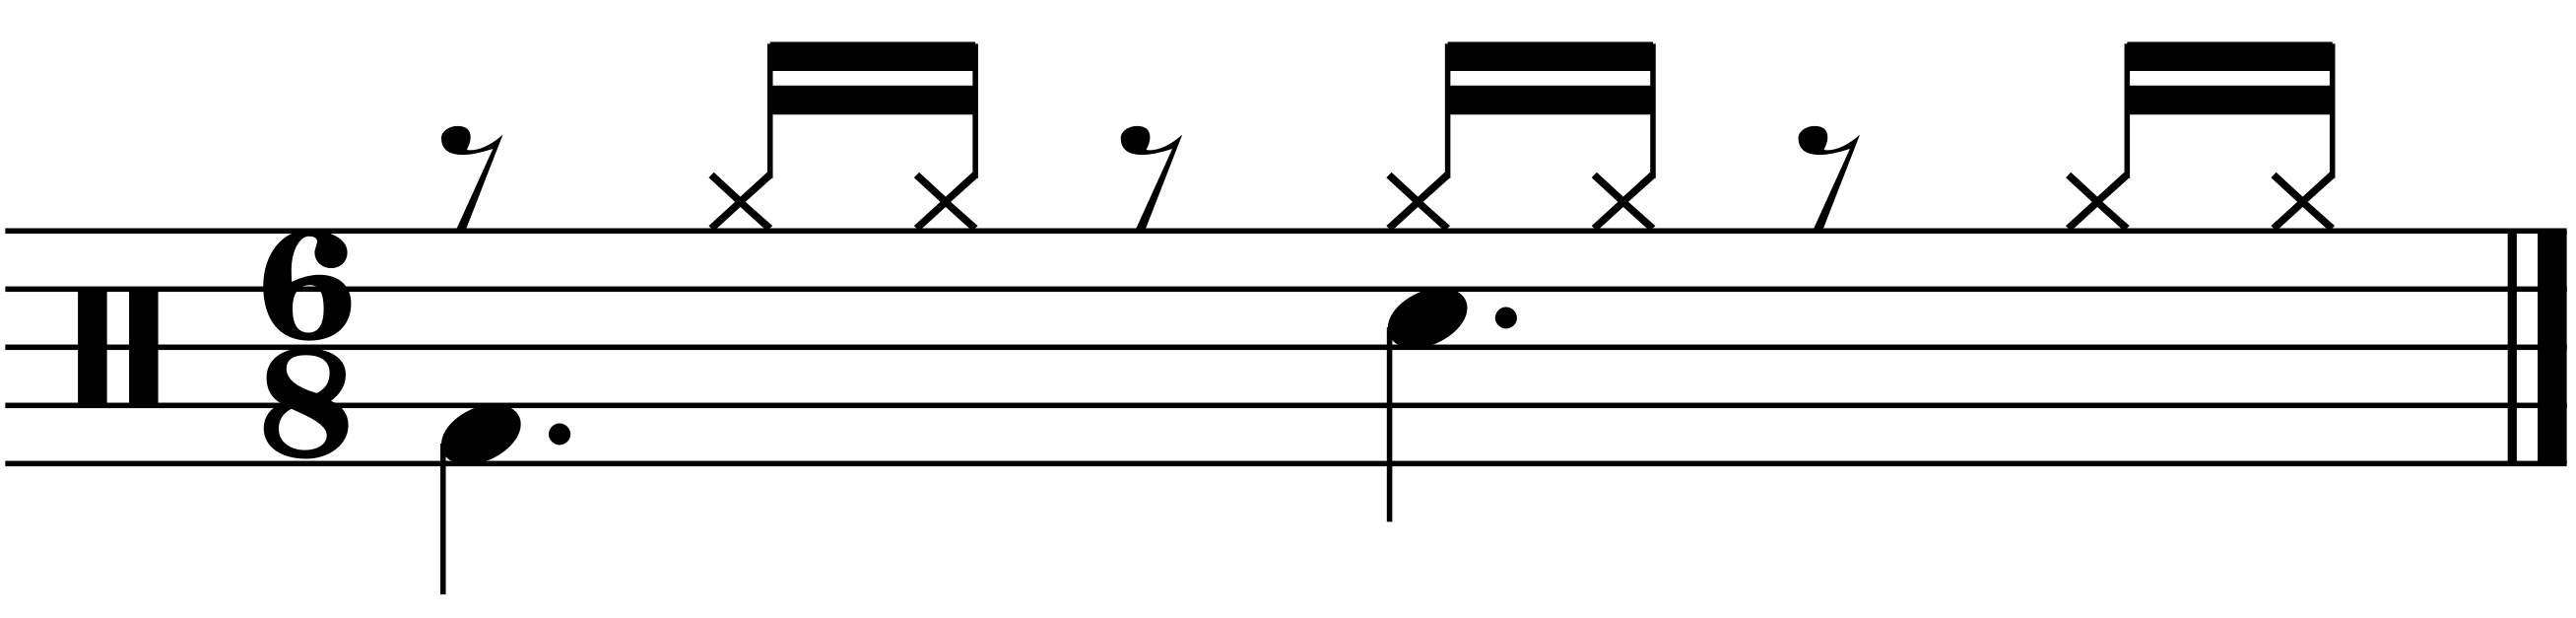 A 6/8 right hand groove concept.